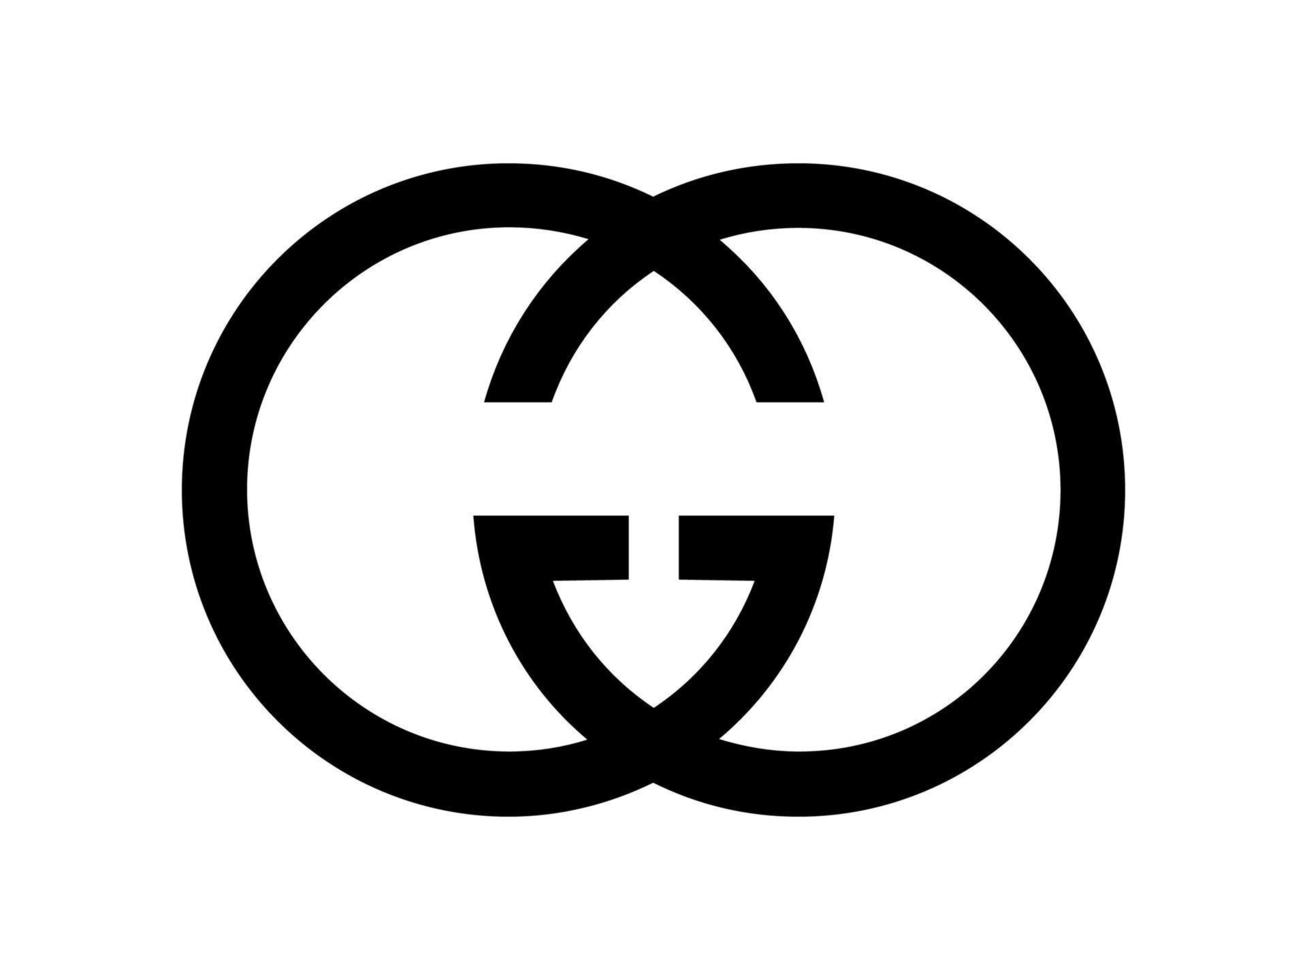 Gucci logo - Gucci icoon Aan wit achtergrond vector